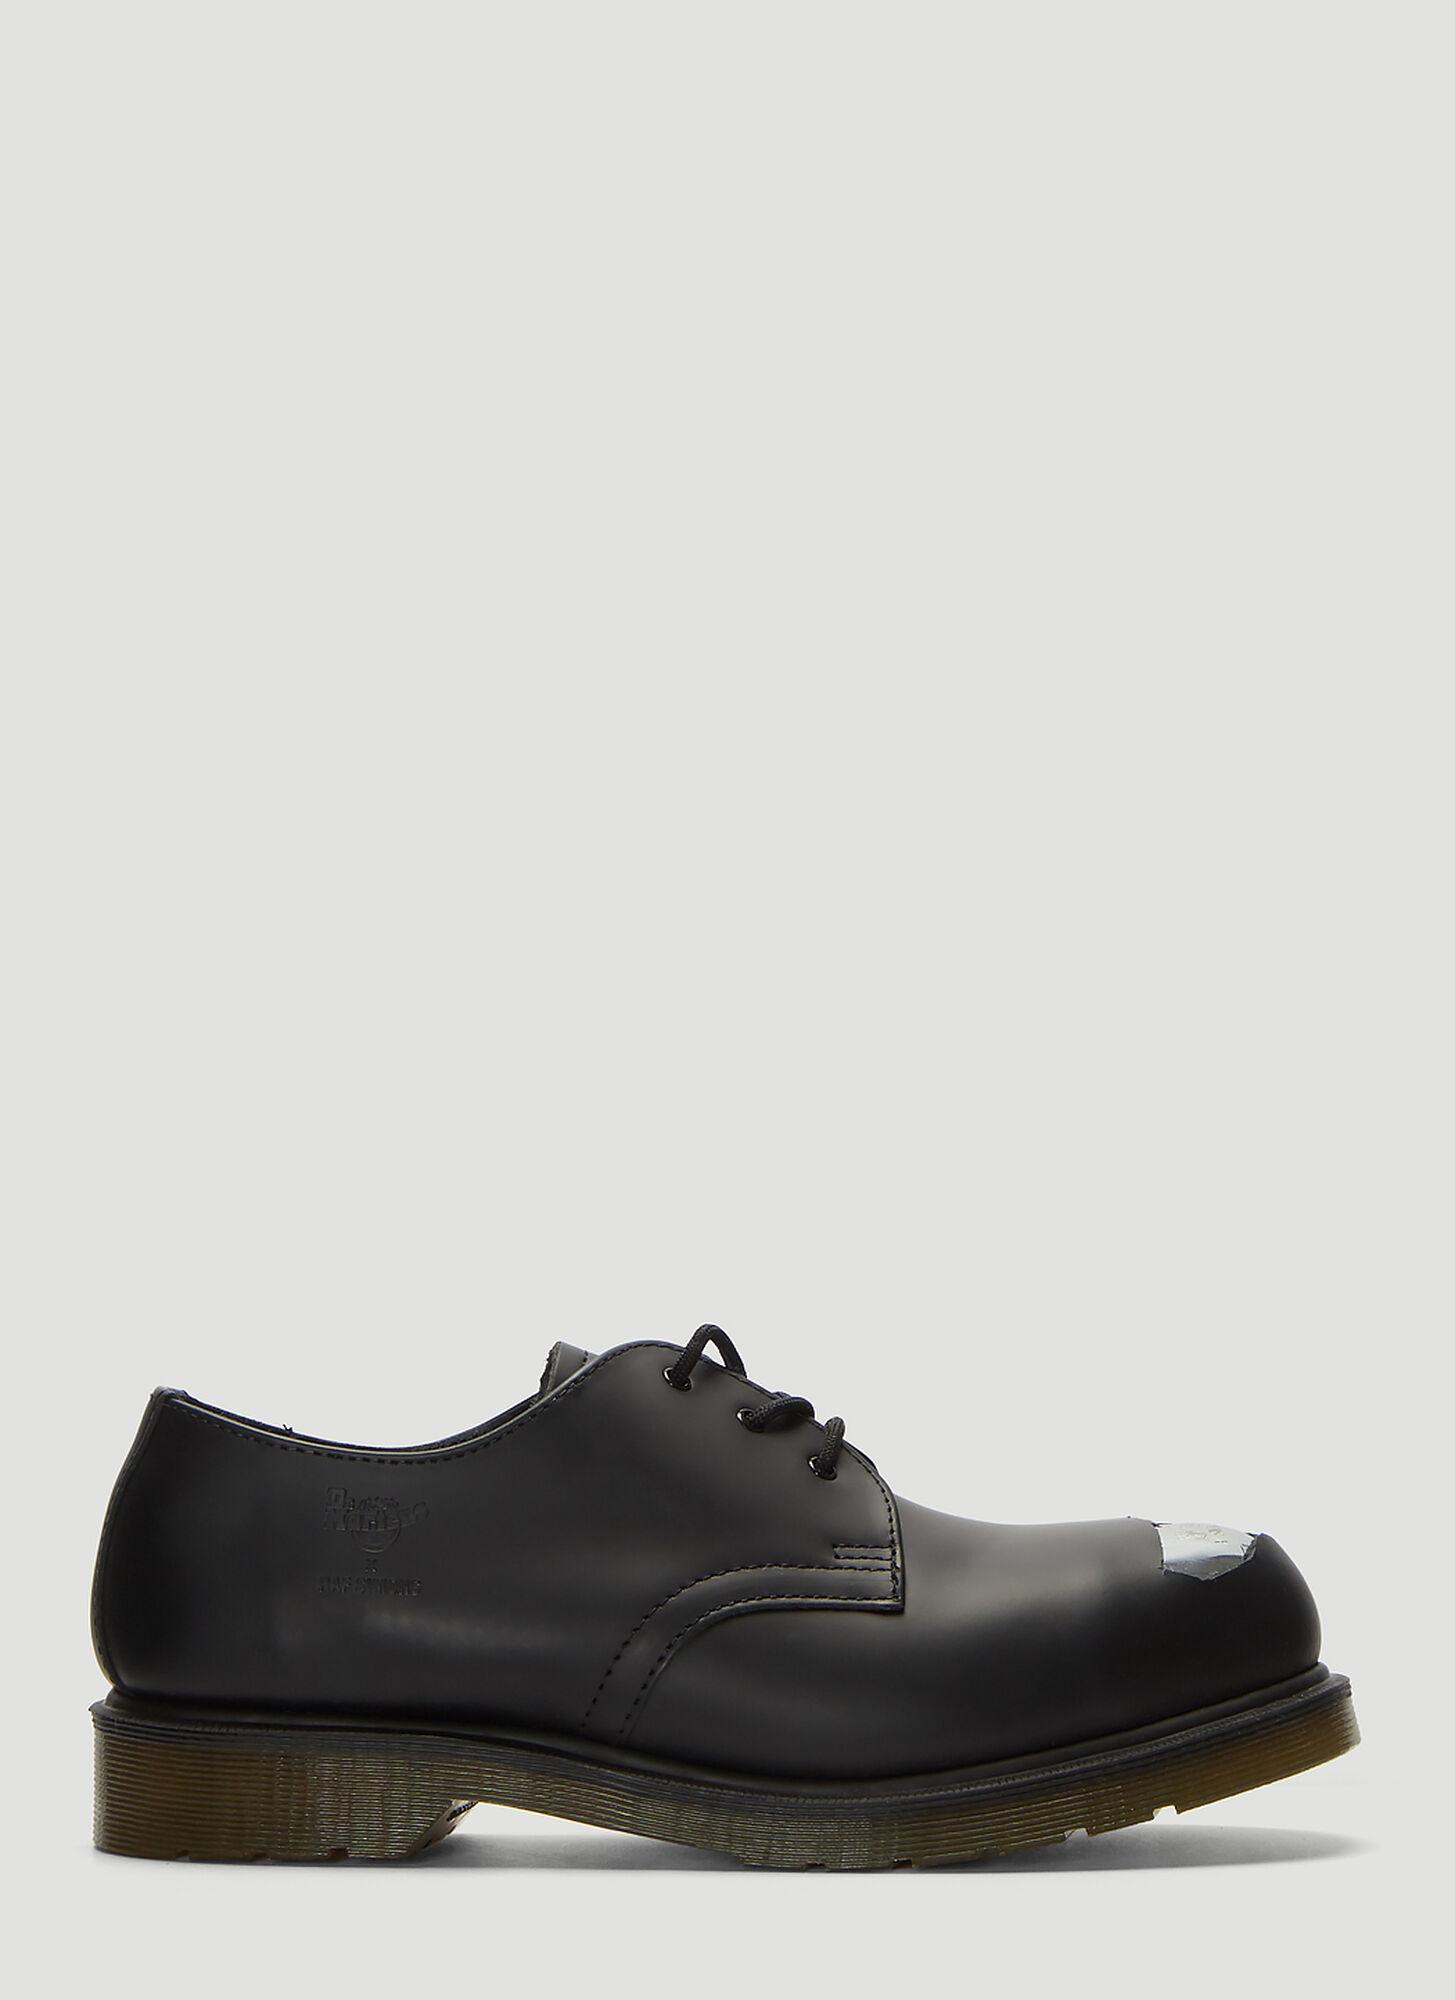 Raf Simons X Dr. Martens Exposed Steel Toe Shoes in Black for Men | Lyst